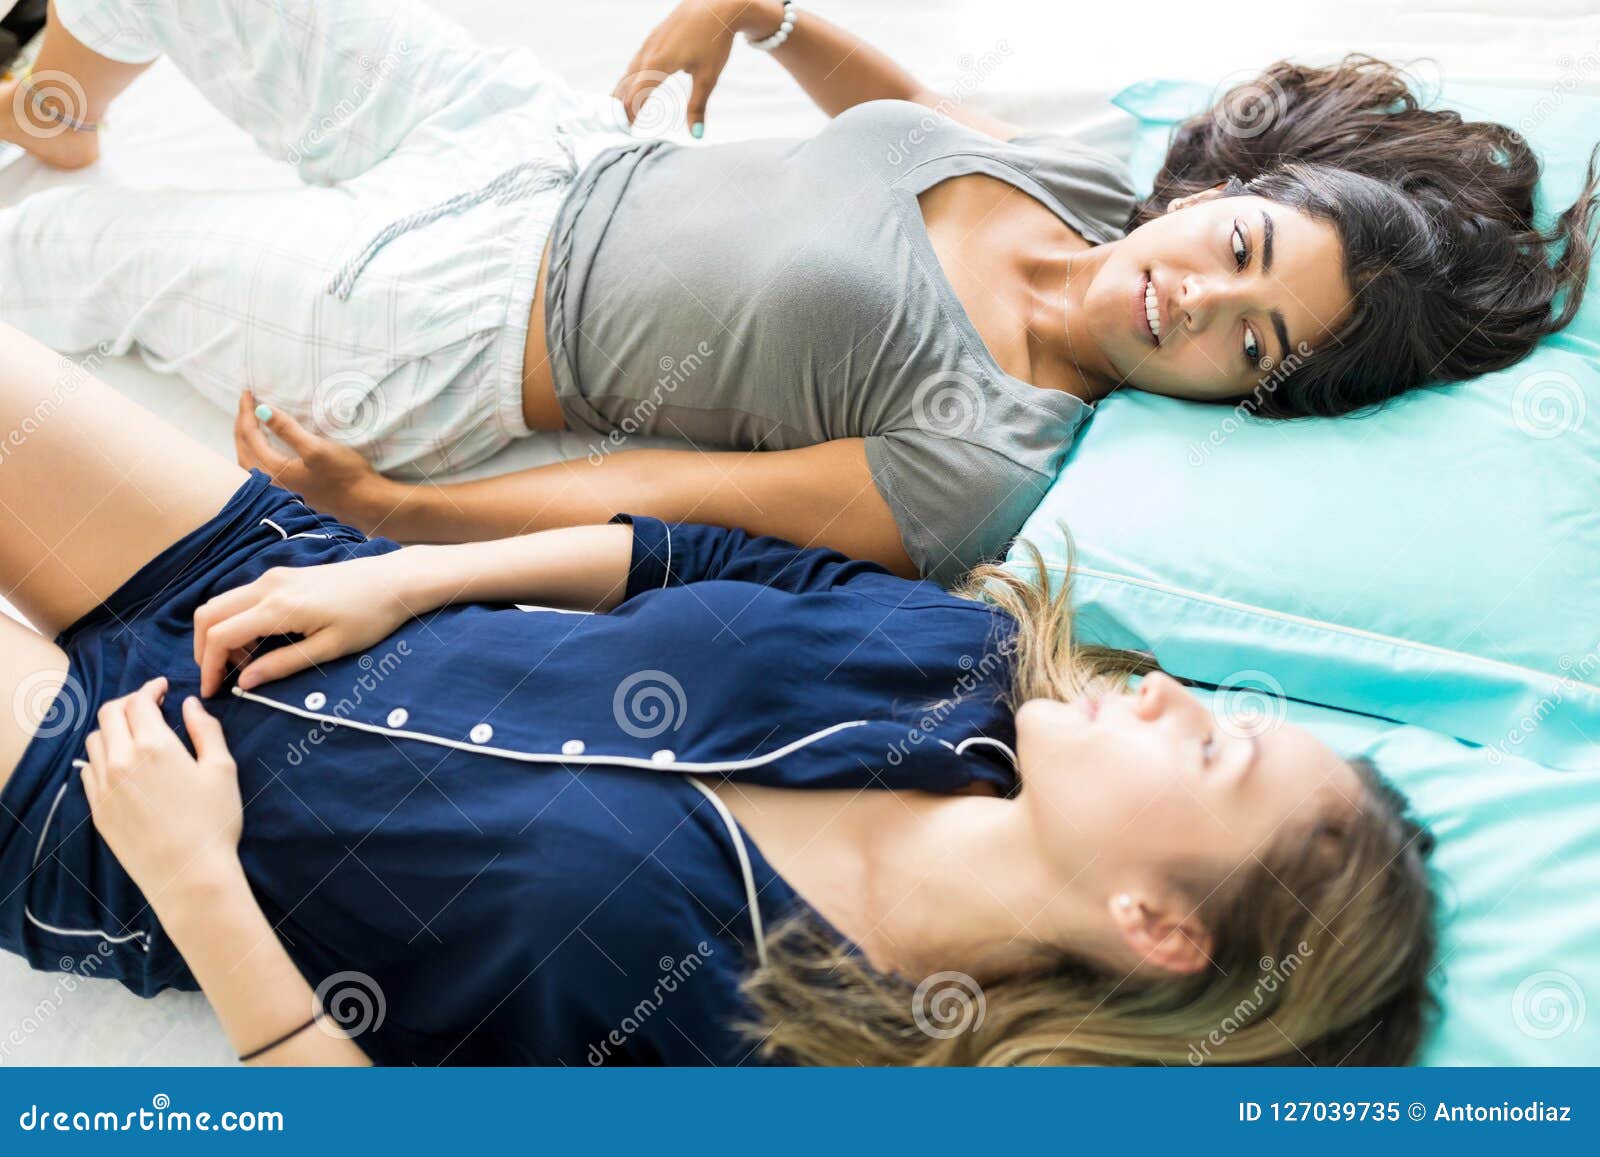 Woman Sharing Problems with Friend while Lying on Bed Stock Image